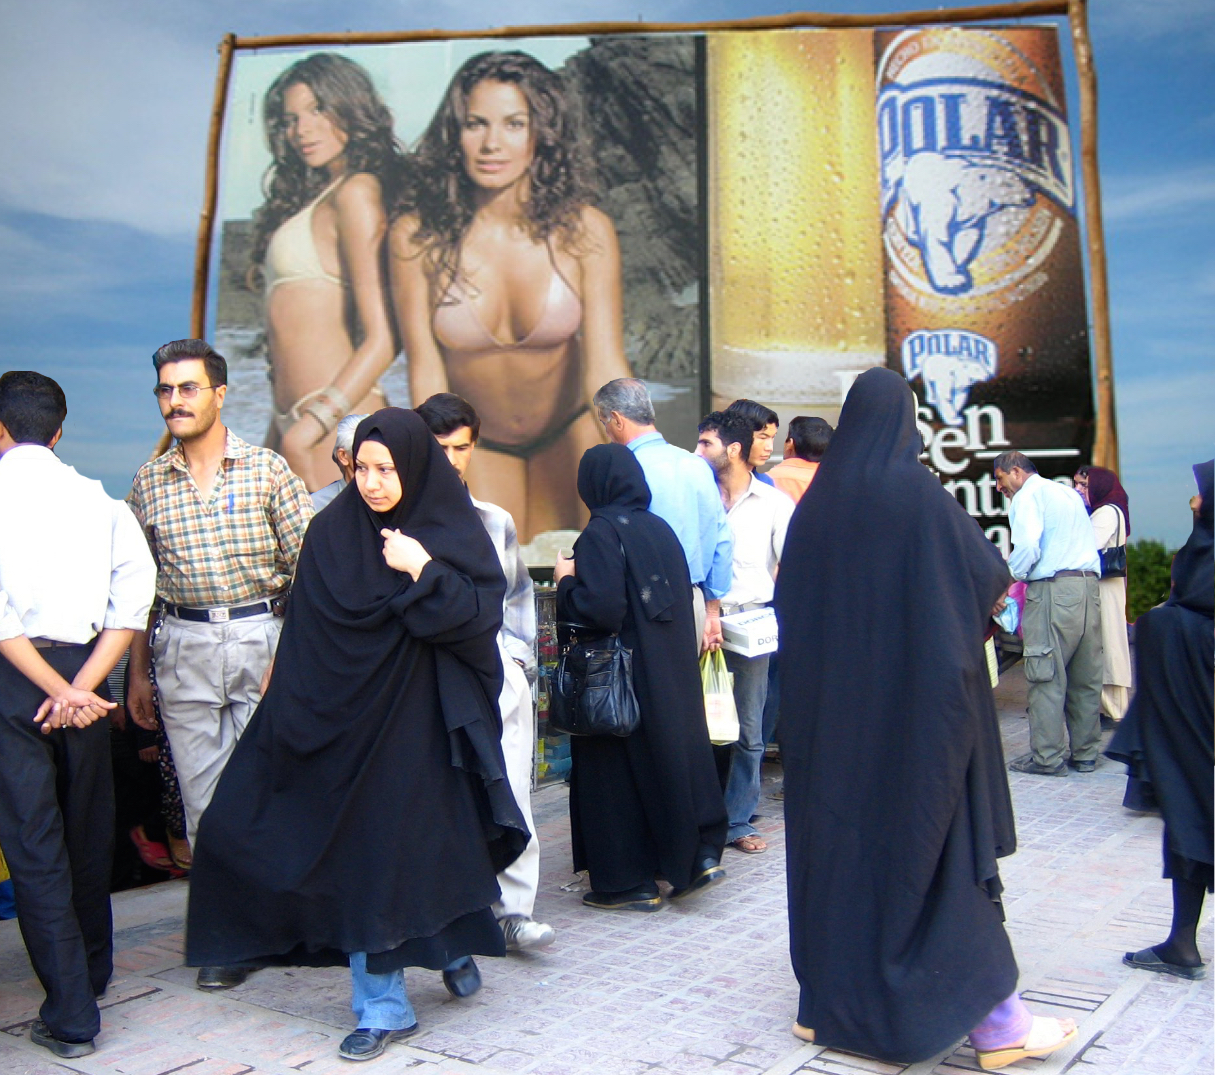 Bikinis vs Chadors in Venezuela and Iran: "After acclimatizing to Venezuela, even some of the Iranian women would adopt the more revealing dress style of their Venezuelan peers." Shiraz street scene photo by Flickr user Gabriel White (CC BY-SA 2.0). Images remixed by Georgia Popplewell.